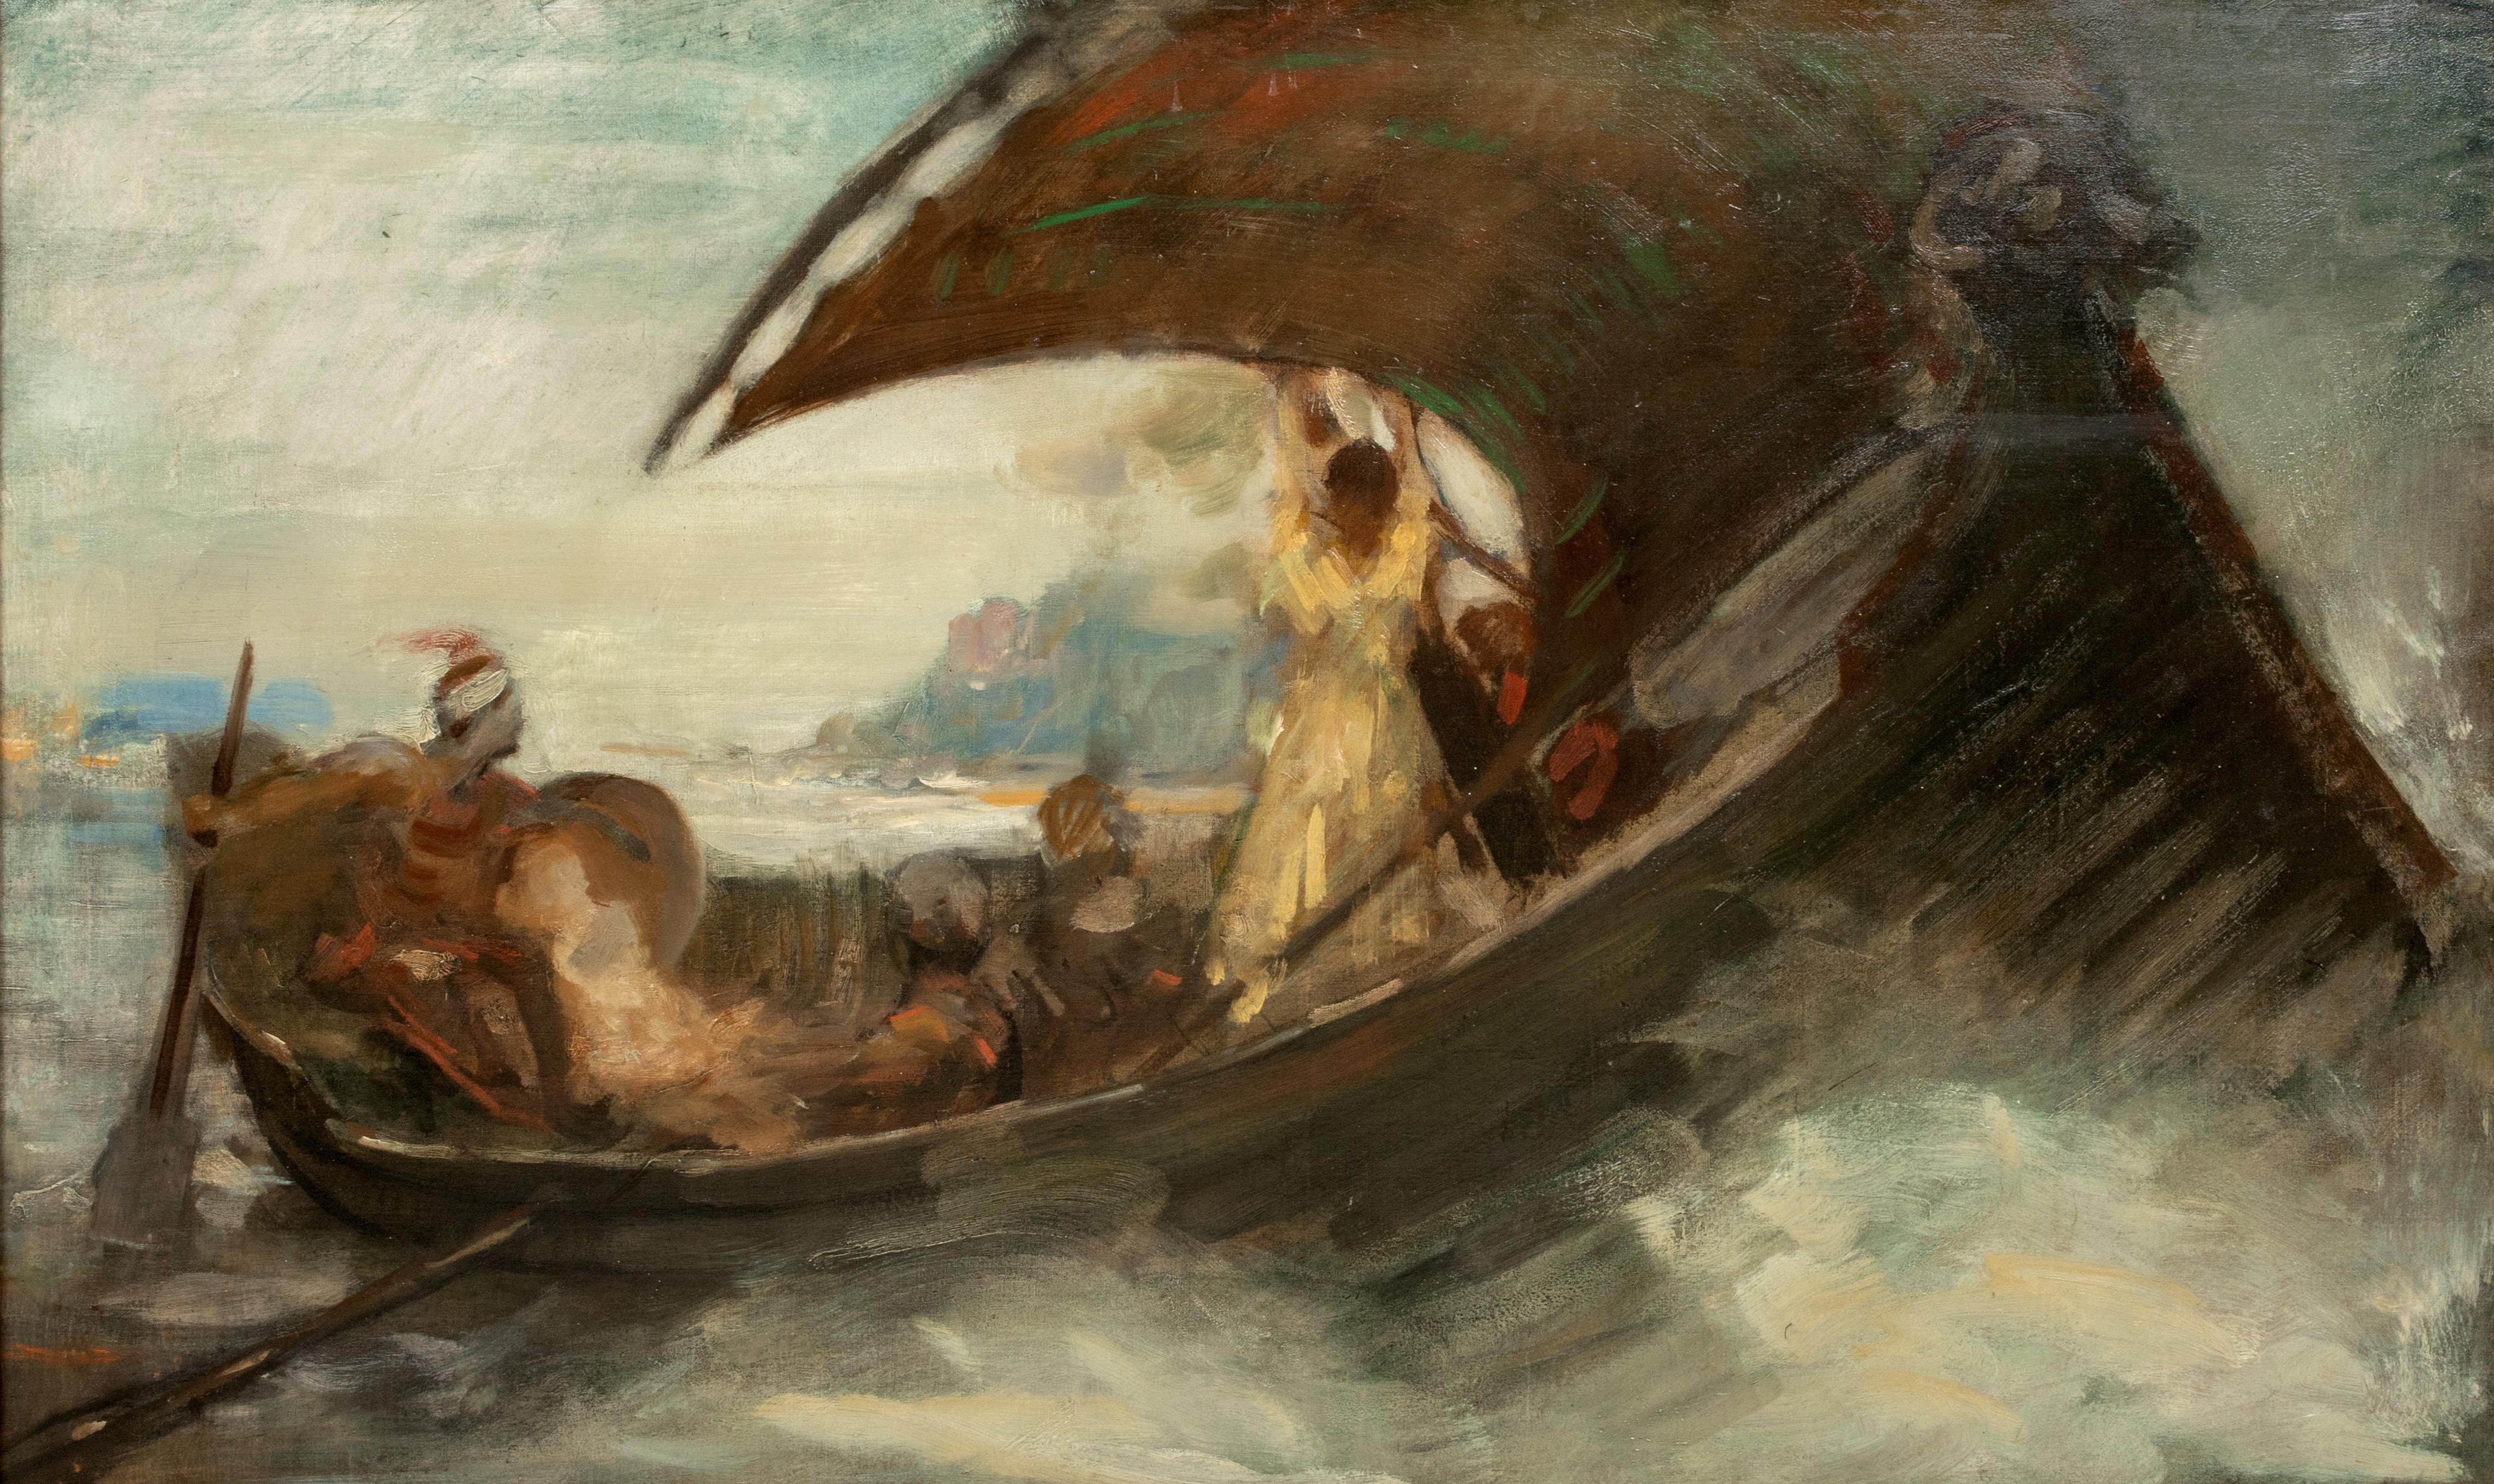 Ottoman Barbary Pirates Raid, 19th Century

circle of Eugène Delacroix (1798-1863)

Large 19th Century scene following a raid by Ottoman pirates with a woman tied to the mast as the flee, oil on canvas. Possibly a historical account from the